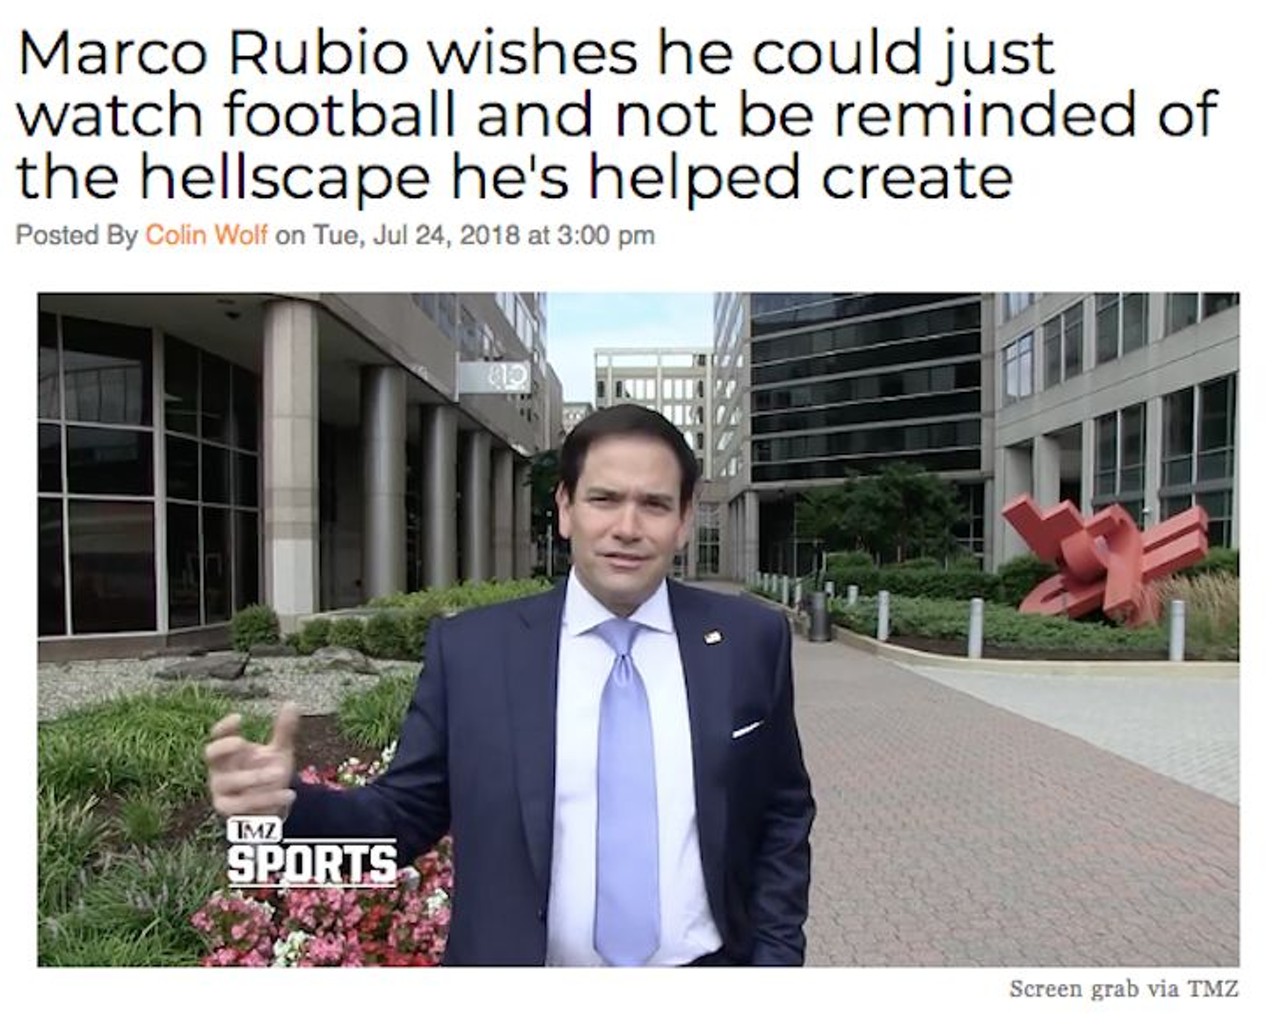 Marco Rubio, a Florida senator who once lobbed a football directly into a little kid's head, said he wishes he could just spend Sunday afternoons watching the NFL and not be reminded of the horrifying reality he helped create. Read more here.